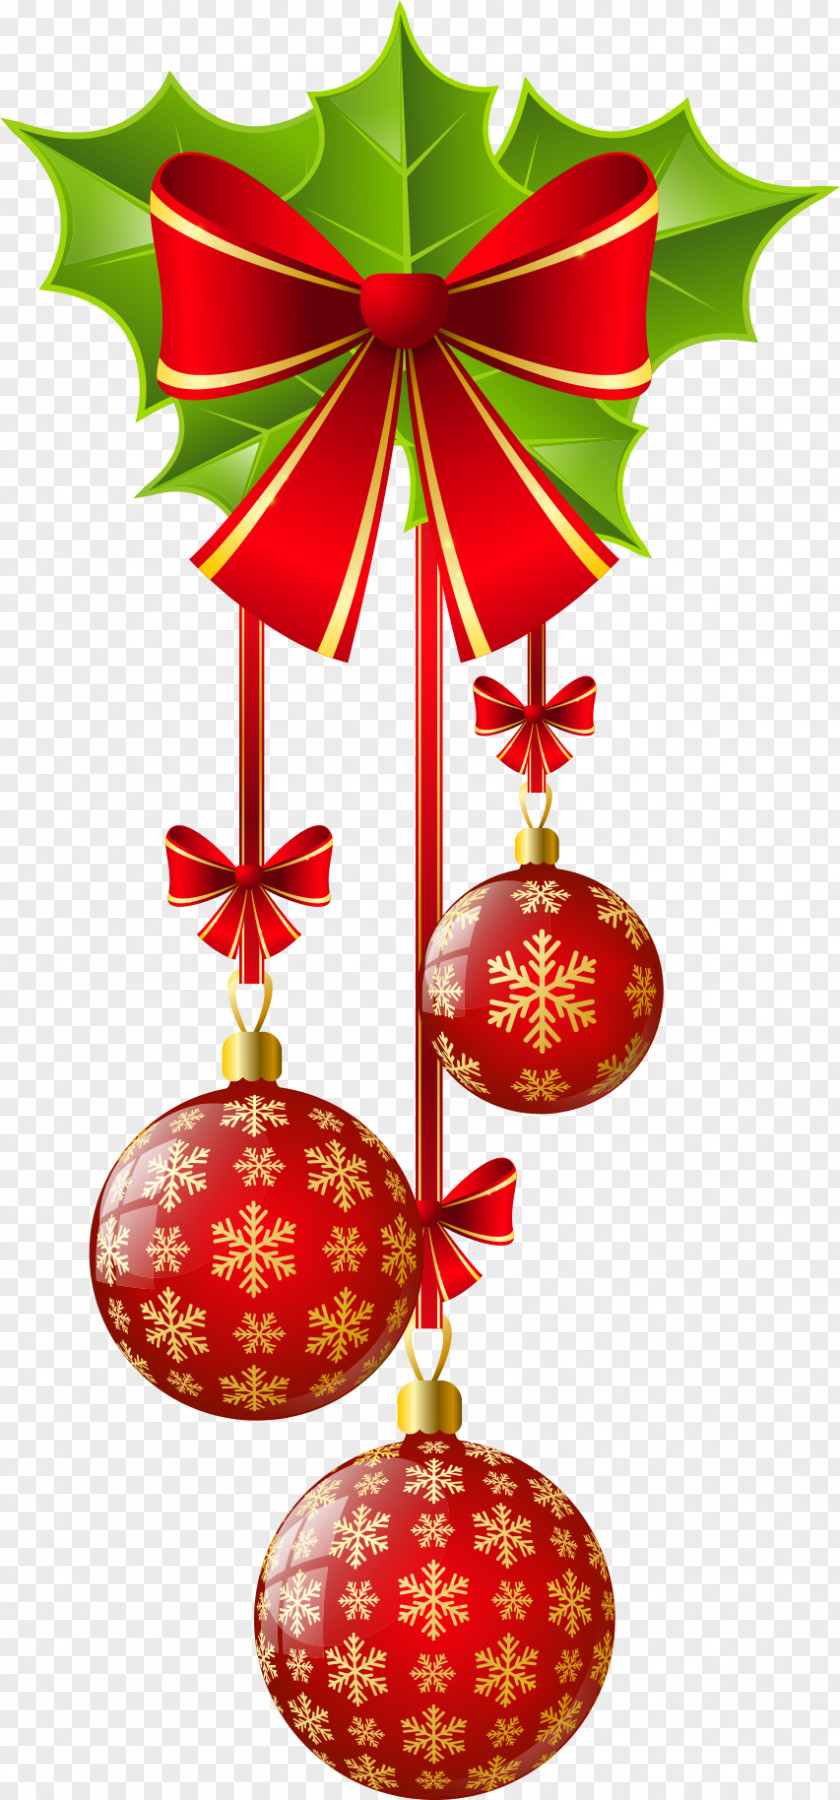 Red Bow And Christmas Balls Ornament Decoration Clip Art PNG